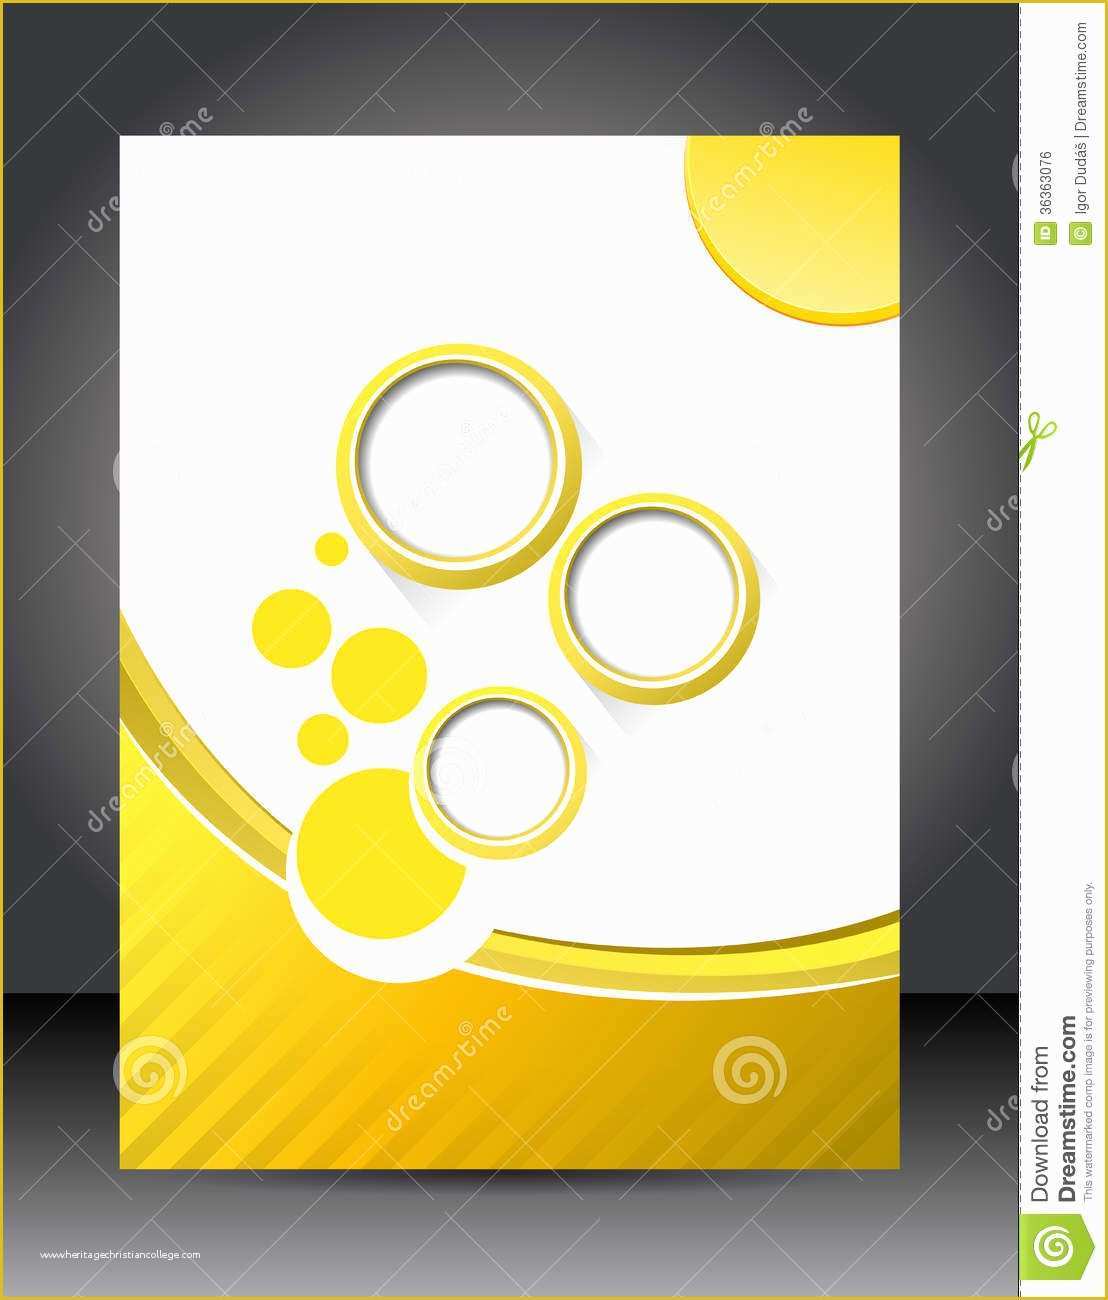 Free Poster Design Templates Of Design Layout Template Stock Illustration Illustration Of